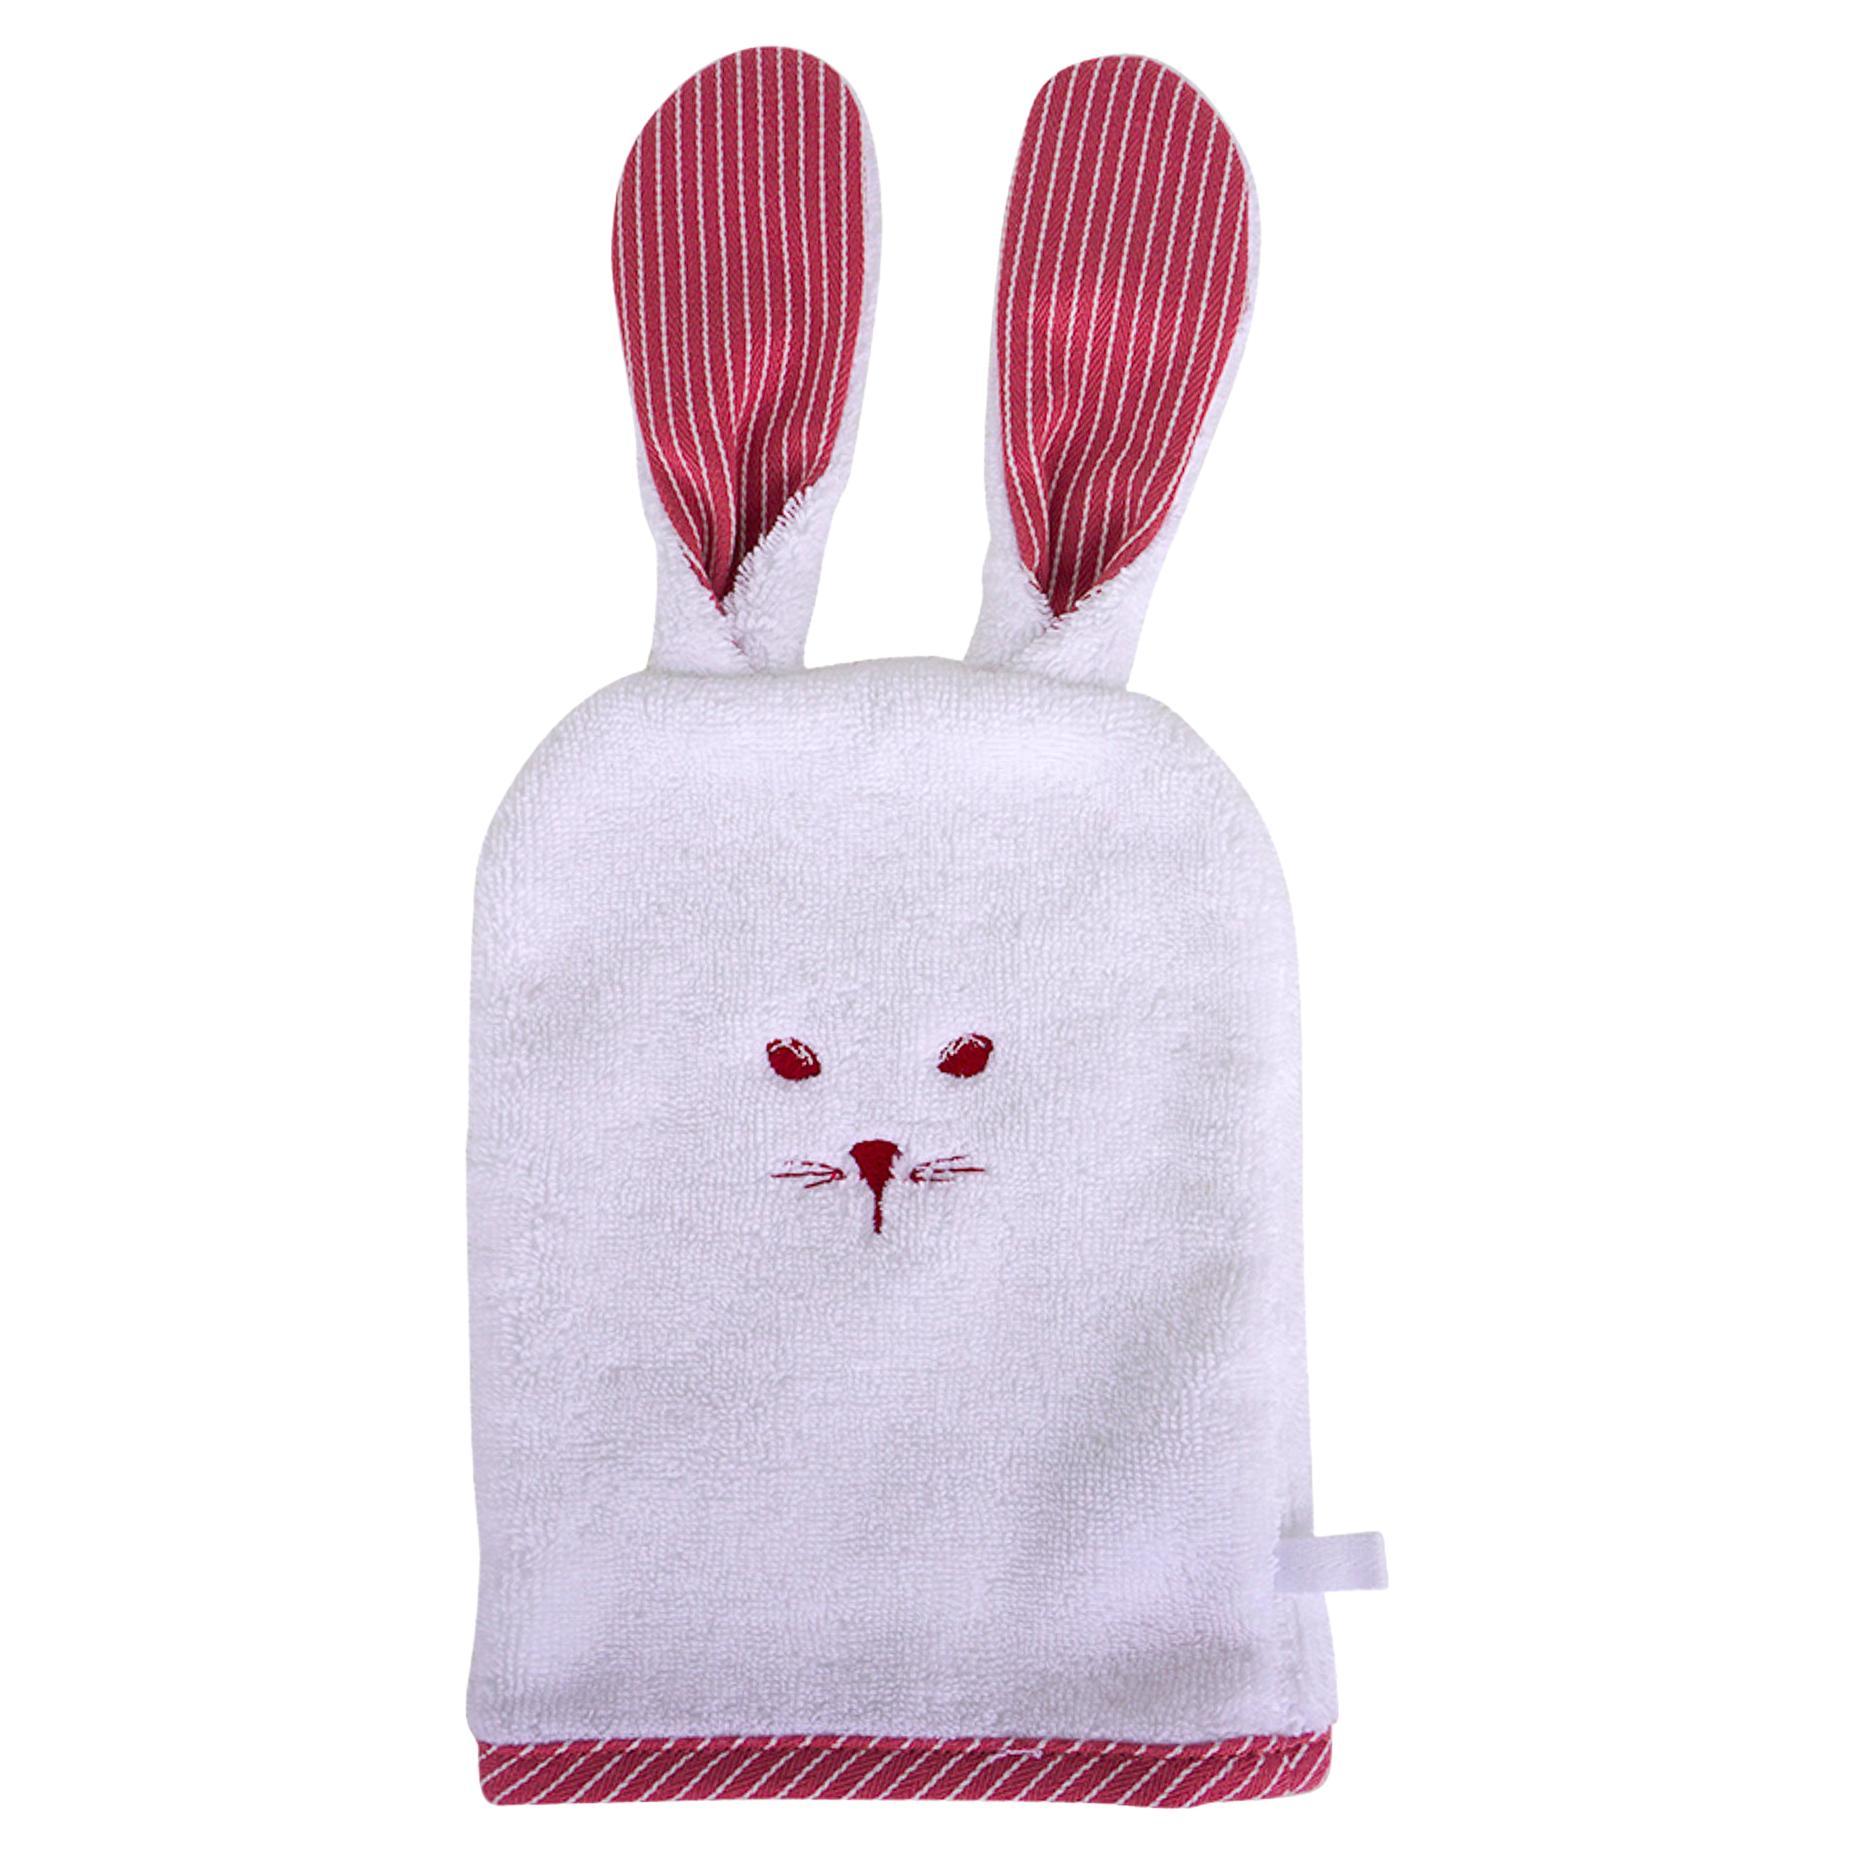 Hermes Passe- Passe Rabbit Washcloth Figue Terry Cotton For Baby